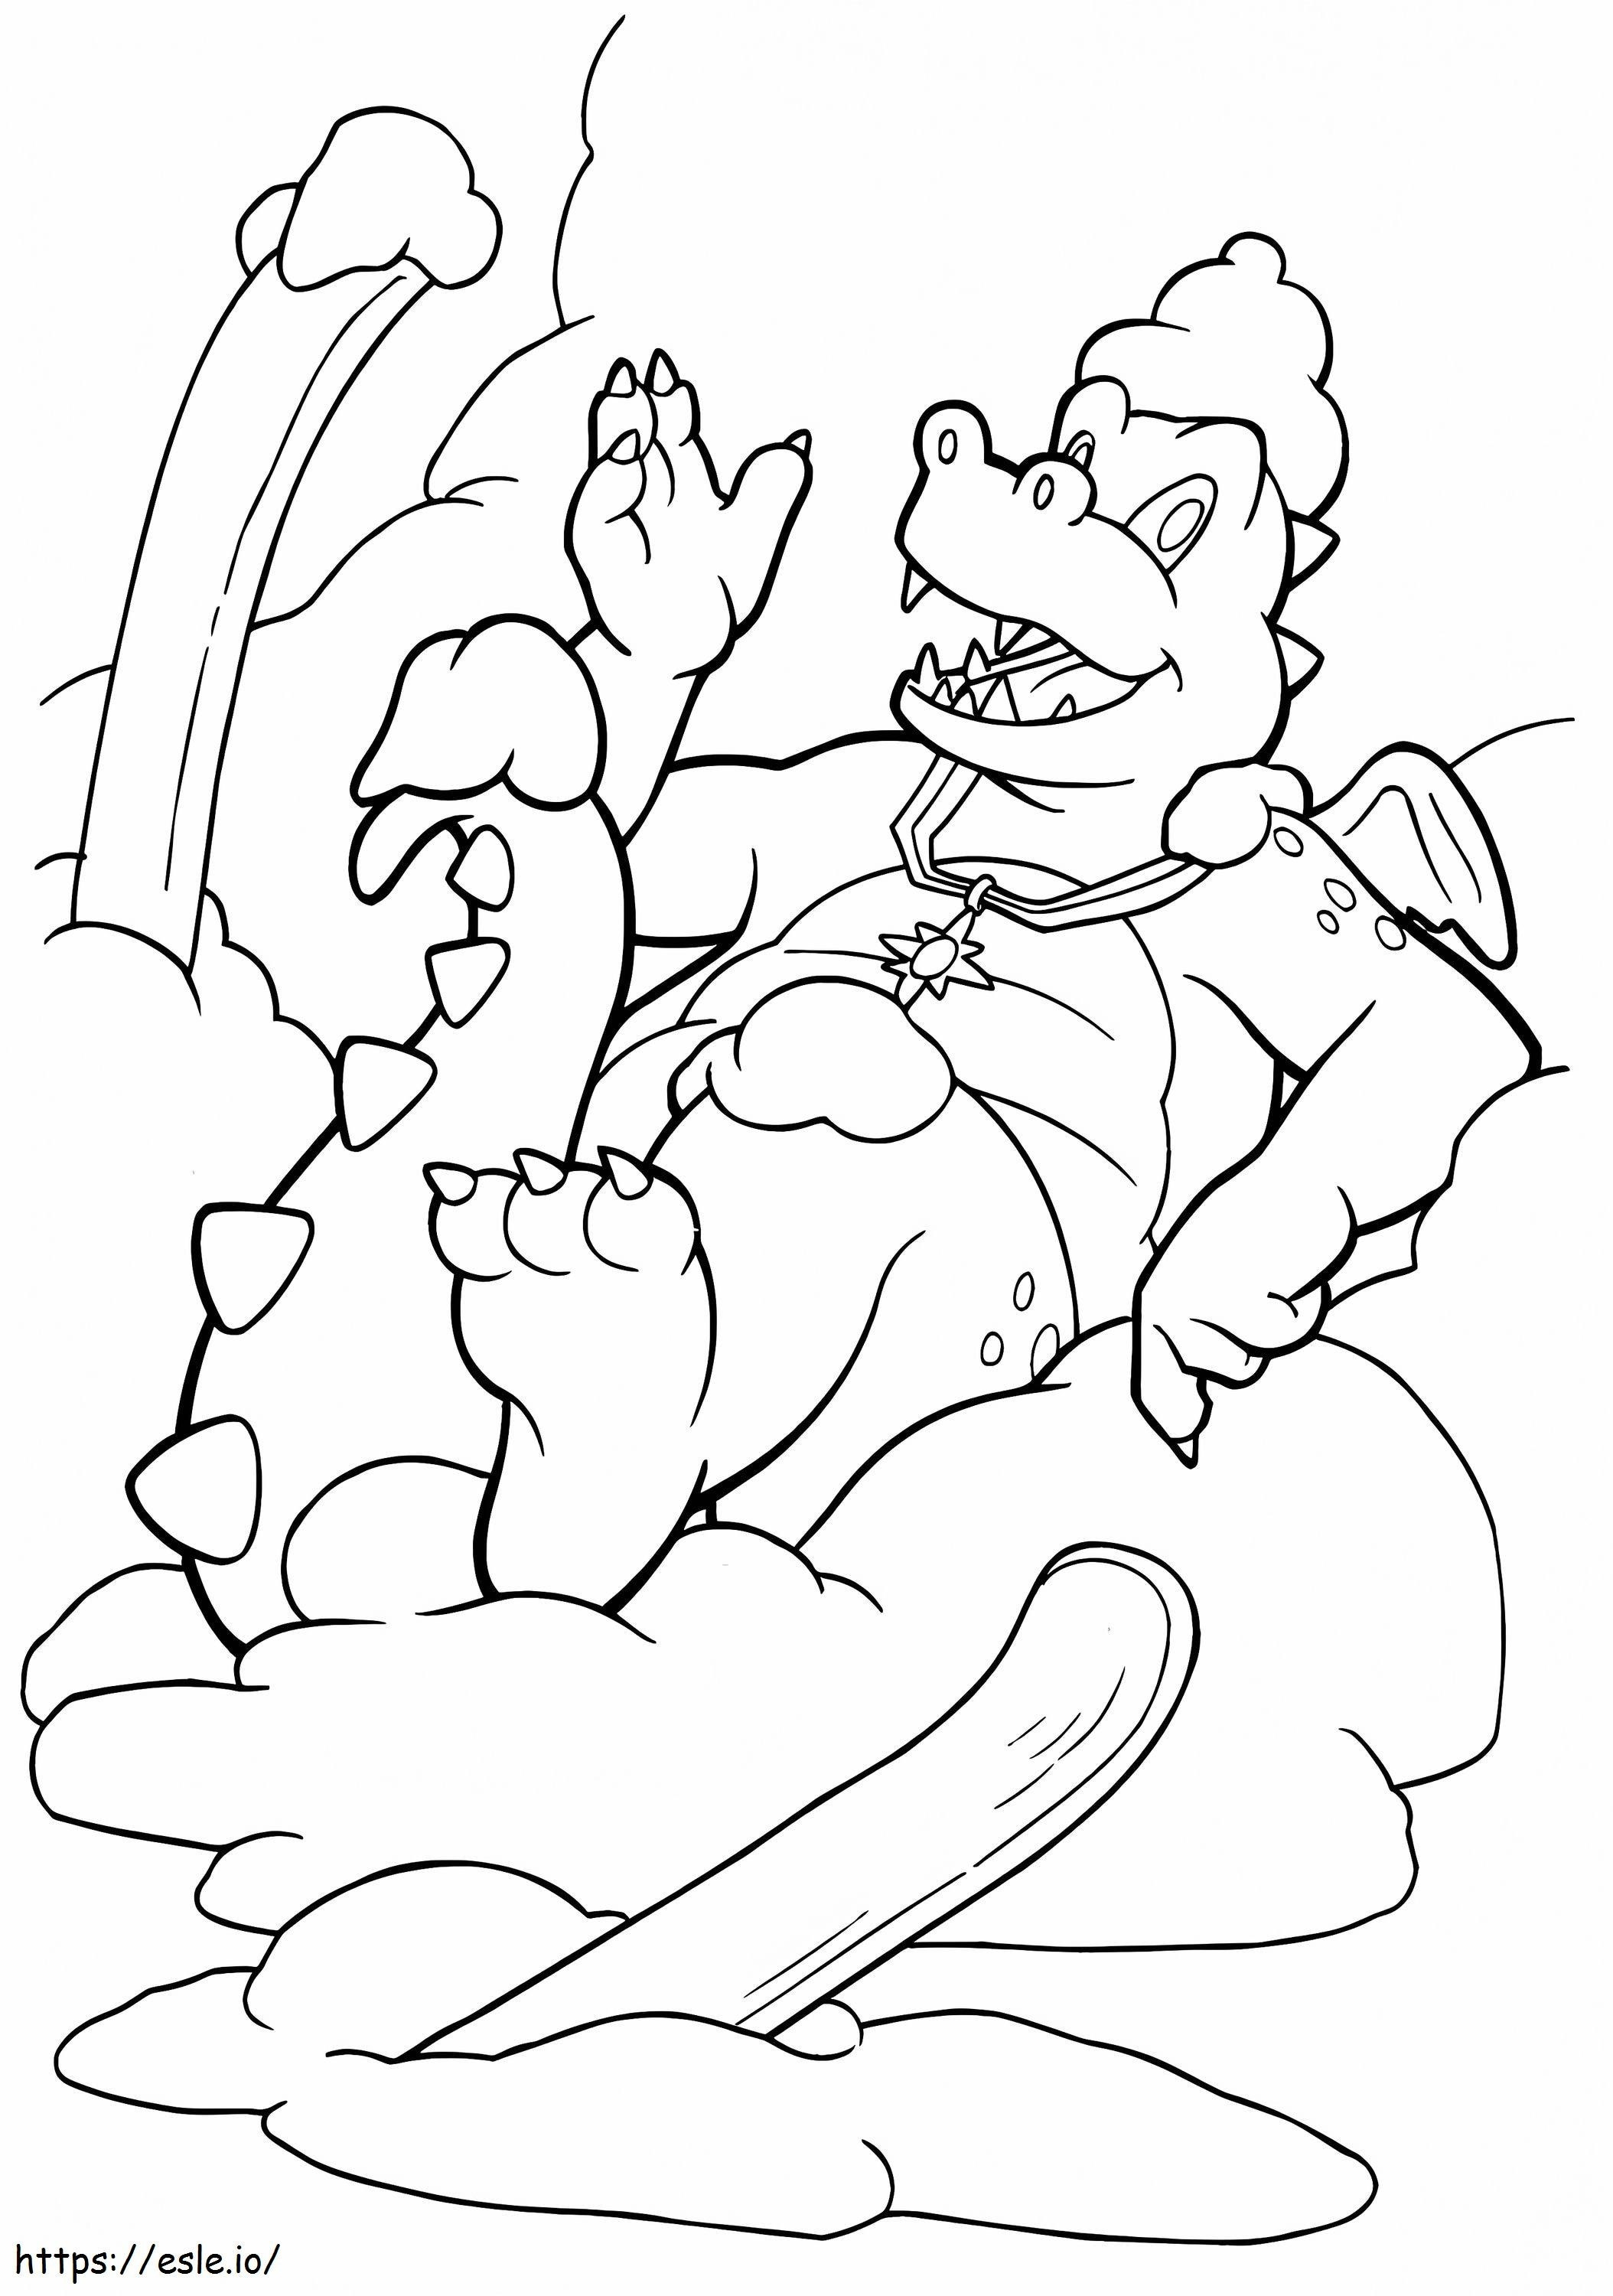 Word coloring page